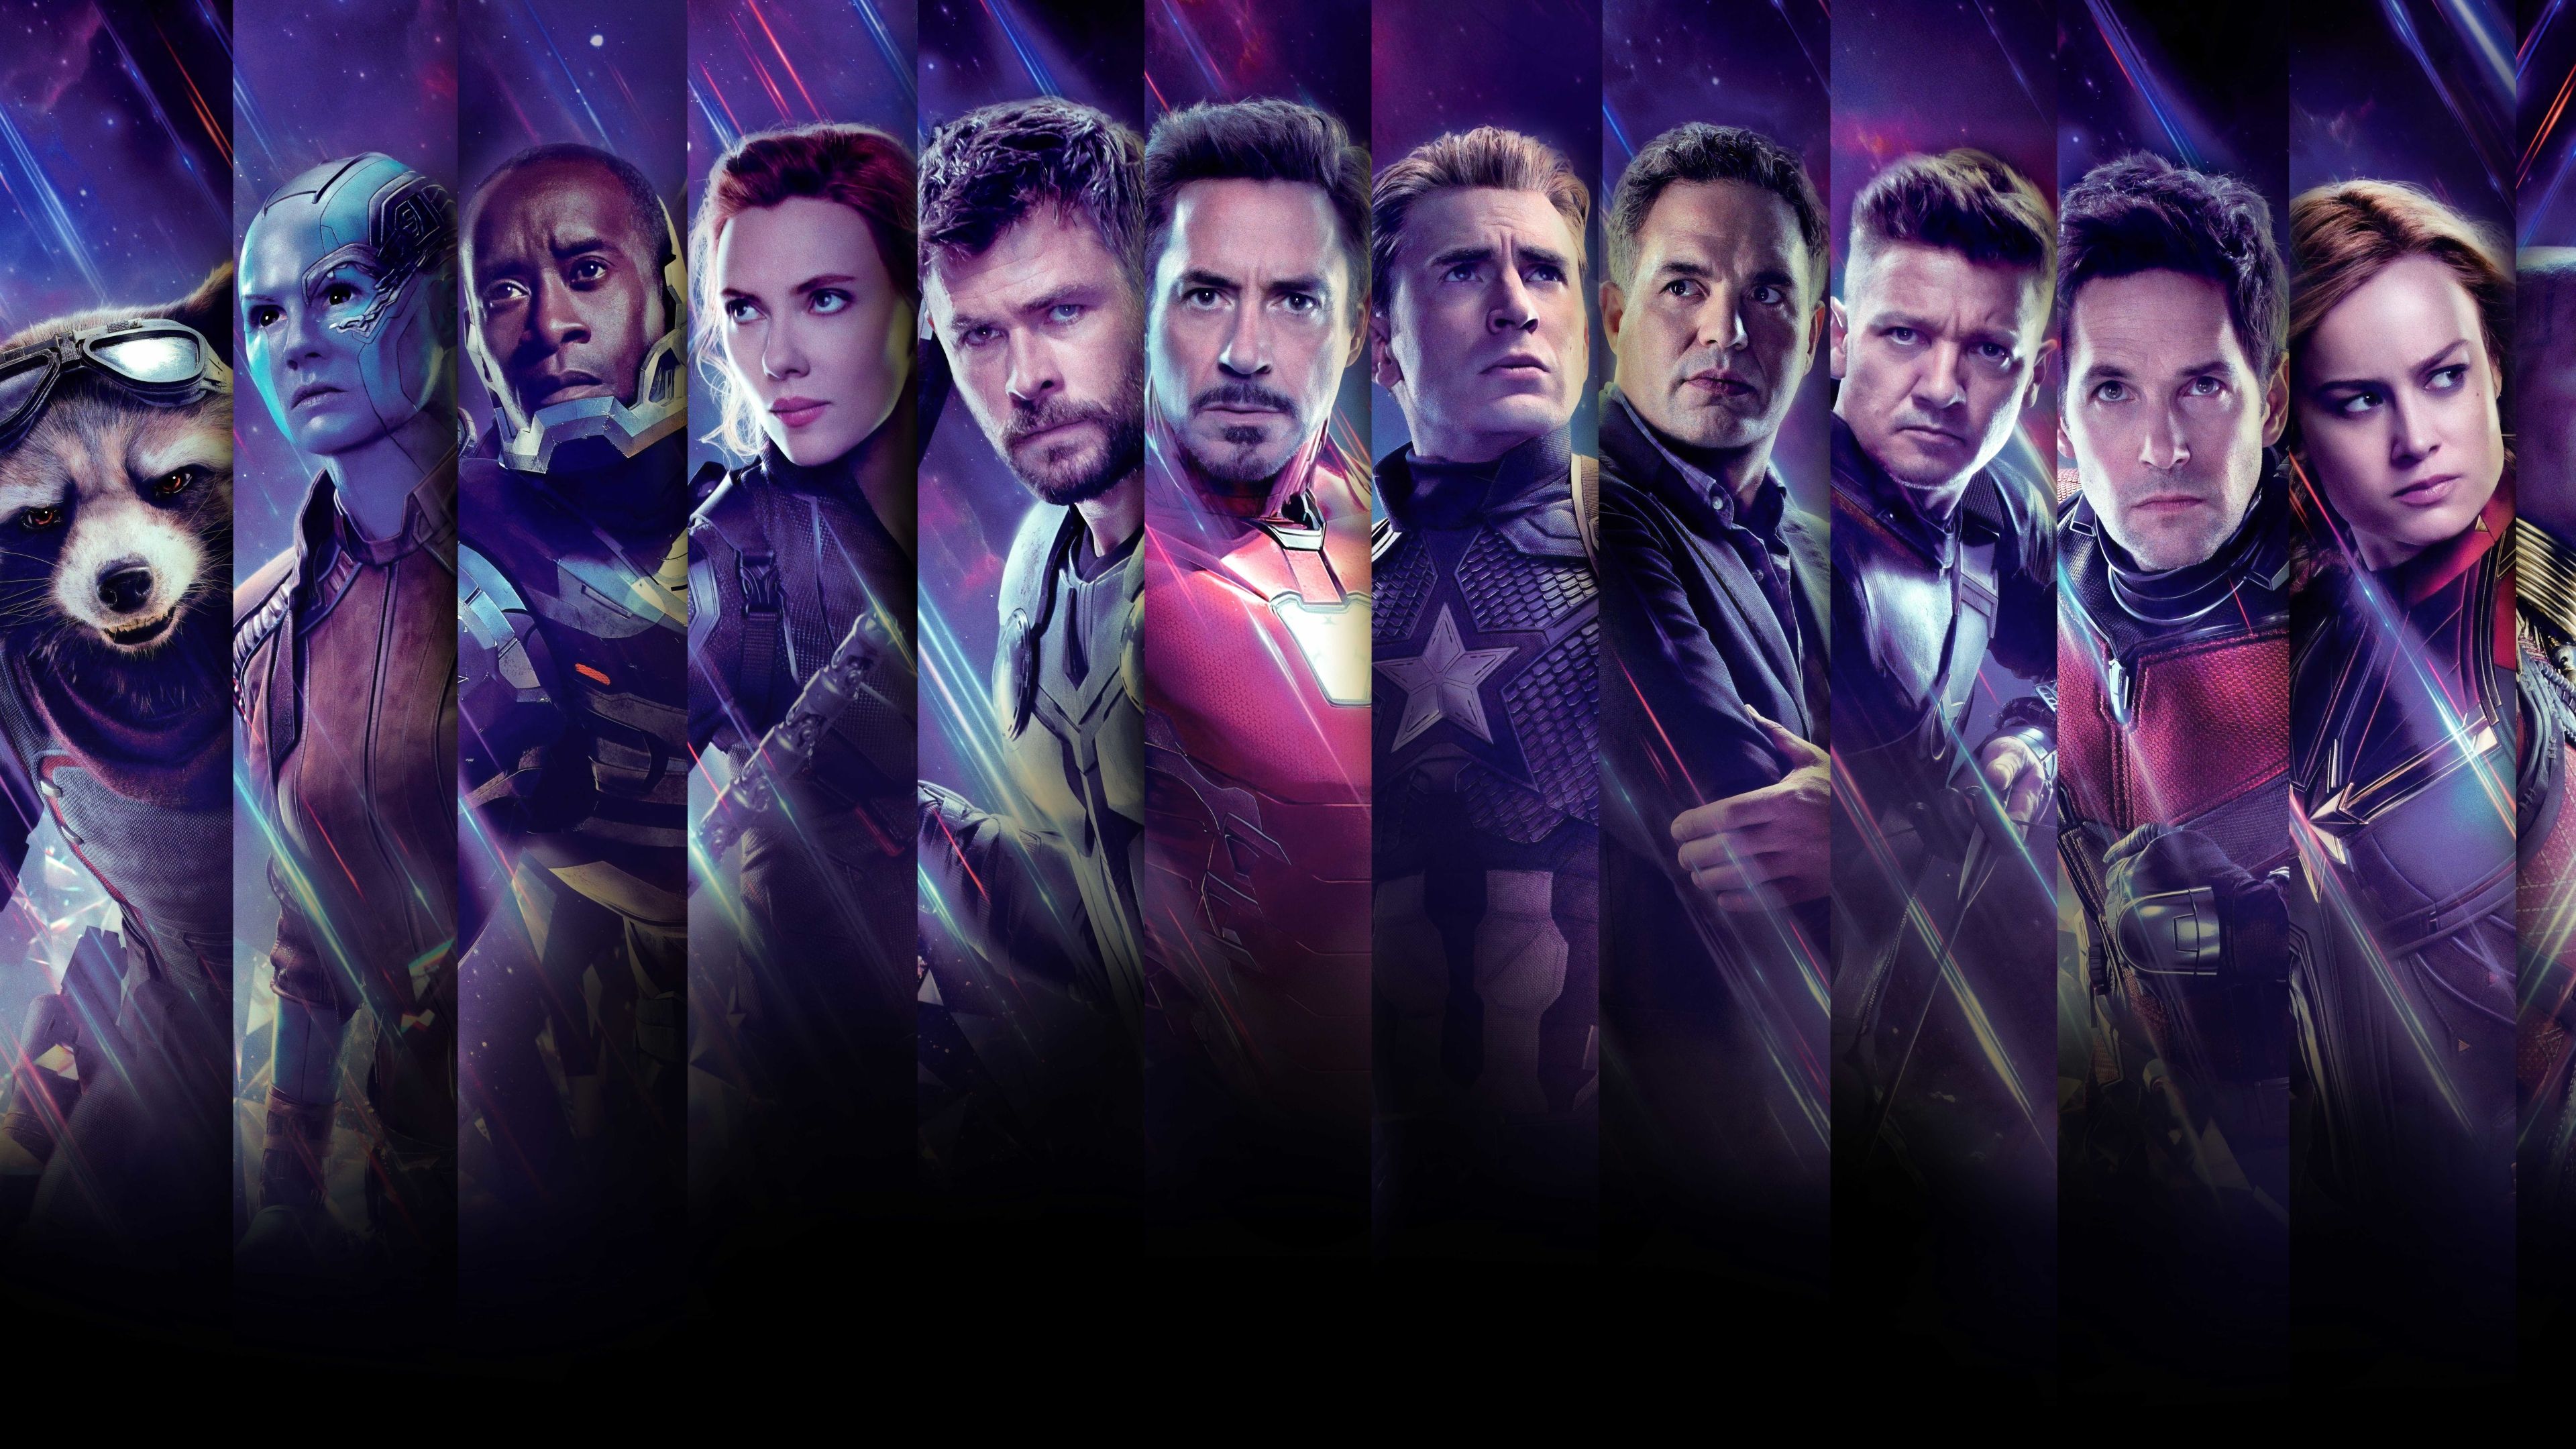 Avengers Endgame All Superhero Characters 4K Wallpaper, HD Movies 4K Wallpaper, Image, Photo and Background